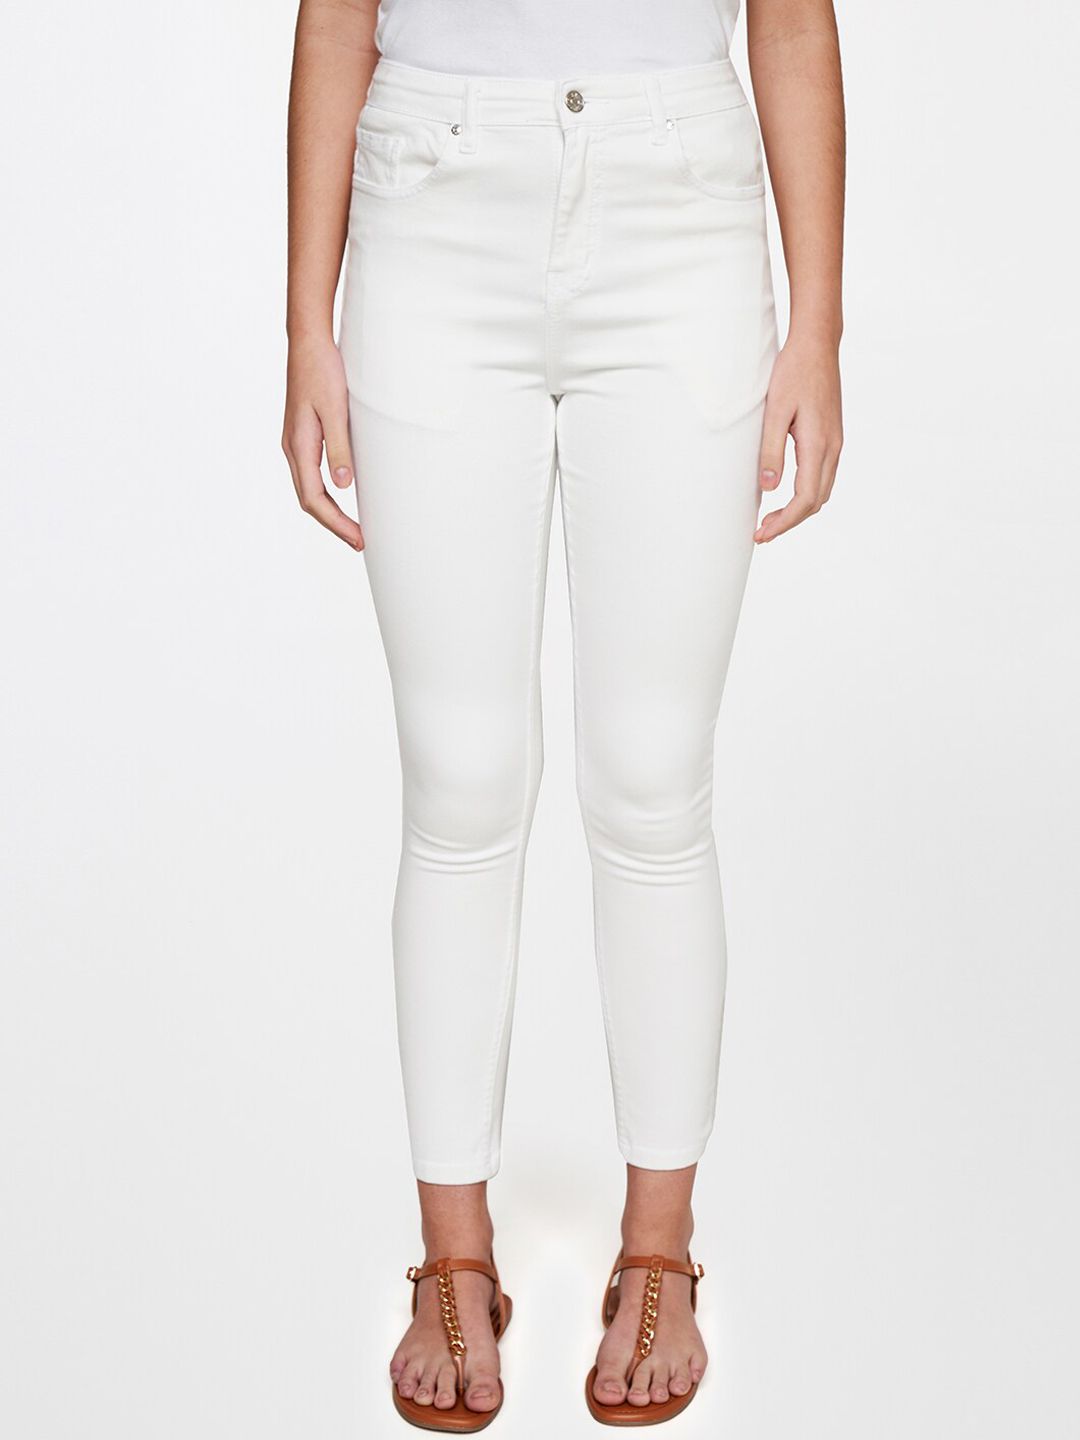 AND Women White Skinny Fit Trousers Price in India